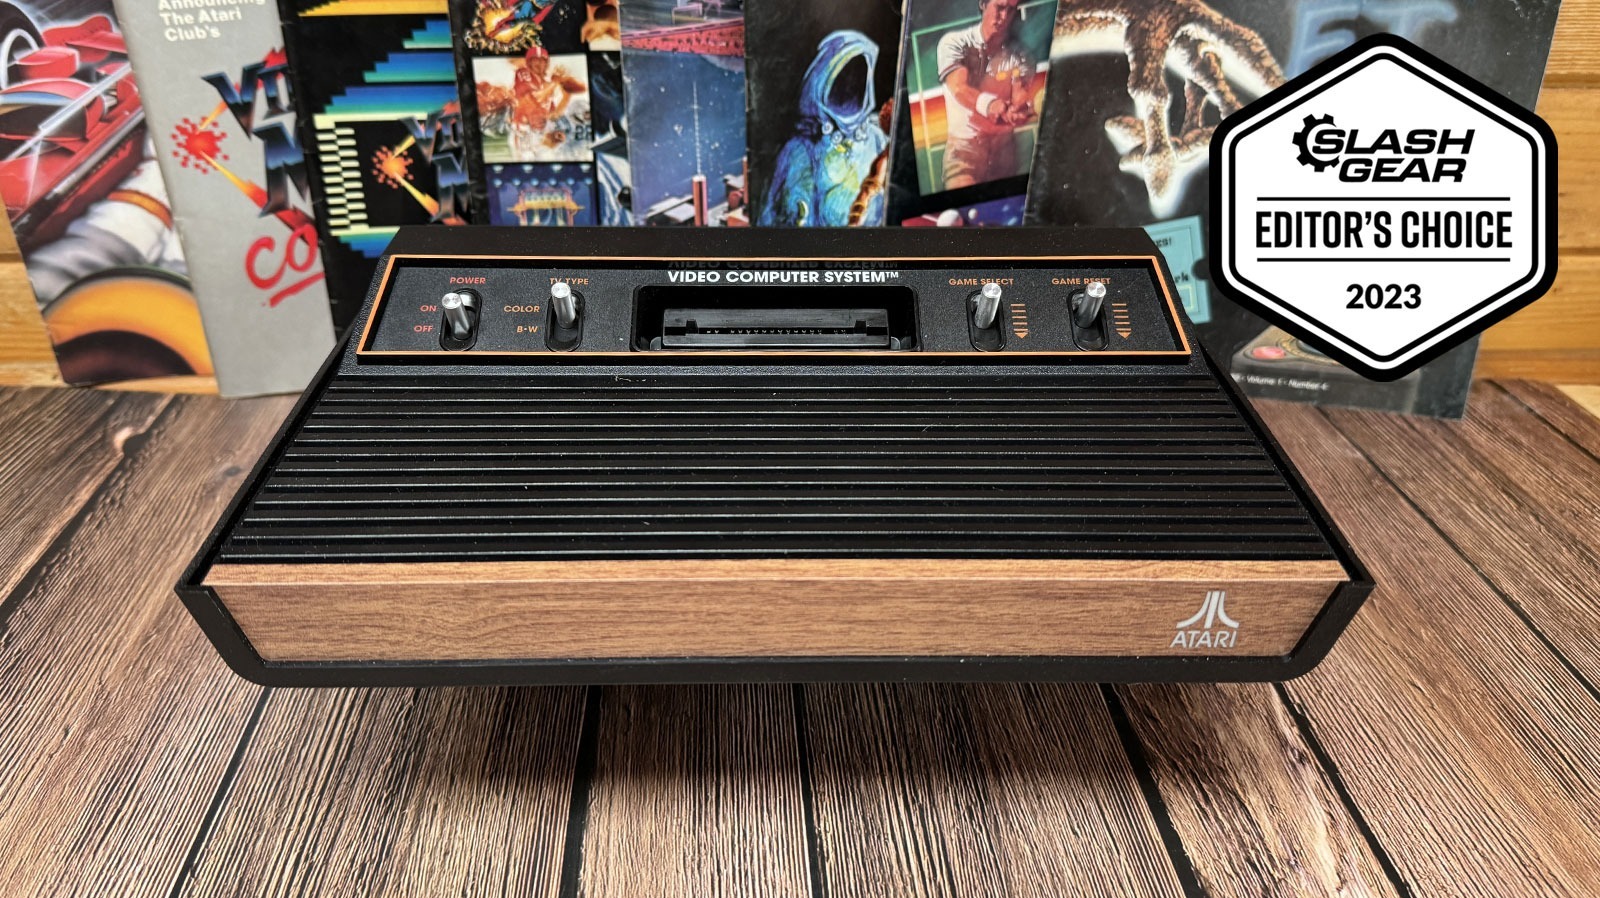 https://www.slashgear.com/img/gallery/atari-2600-plus-review-updated-retro-analogue-for-better-or-for-worse/l-intro-1701811219.jpg